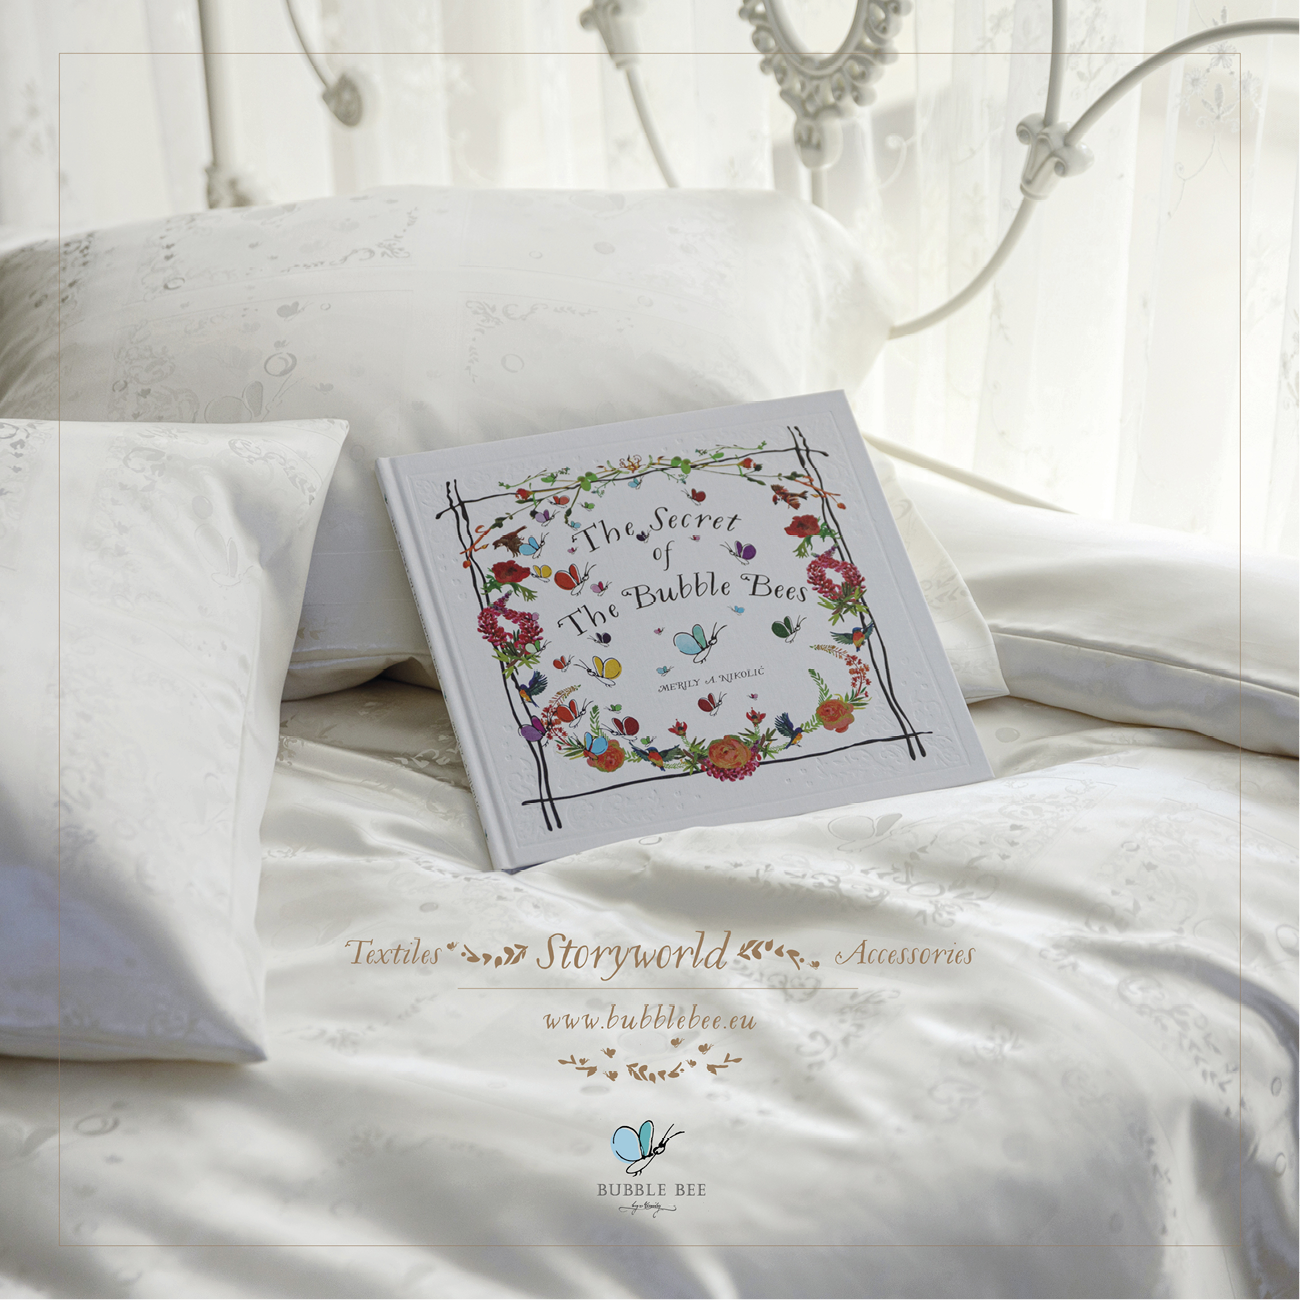 High End Children's Silk Bedding Set The Bubble Bee Silk Jacquard Nature with the fairy tale book "The Secret of The Bubble Bees" is exceptional gift for your precious child. Duvet cover, flat bed sheet, pillow case. All stitches finished with a french seams. Bespoke sizes